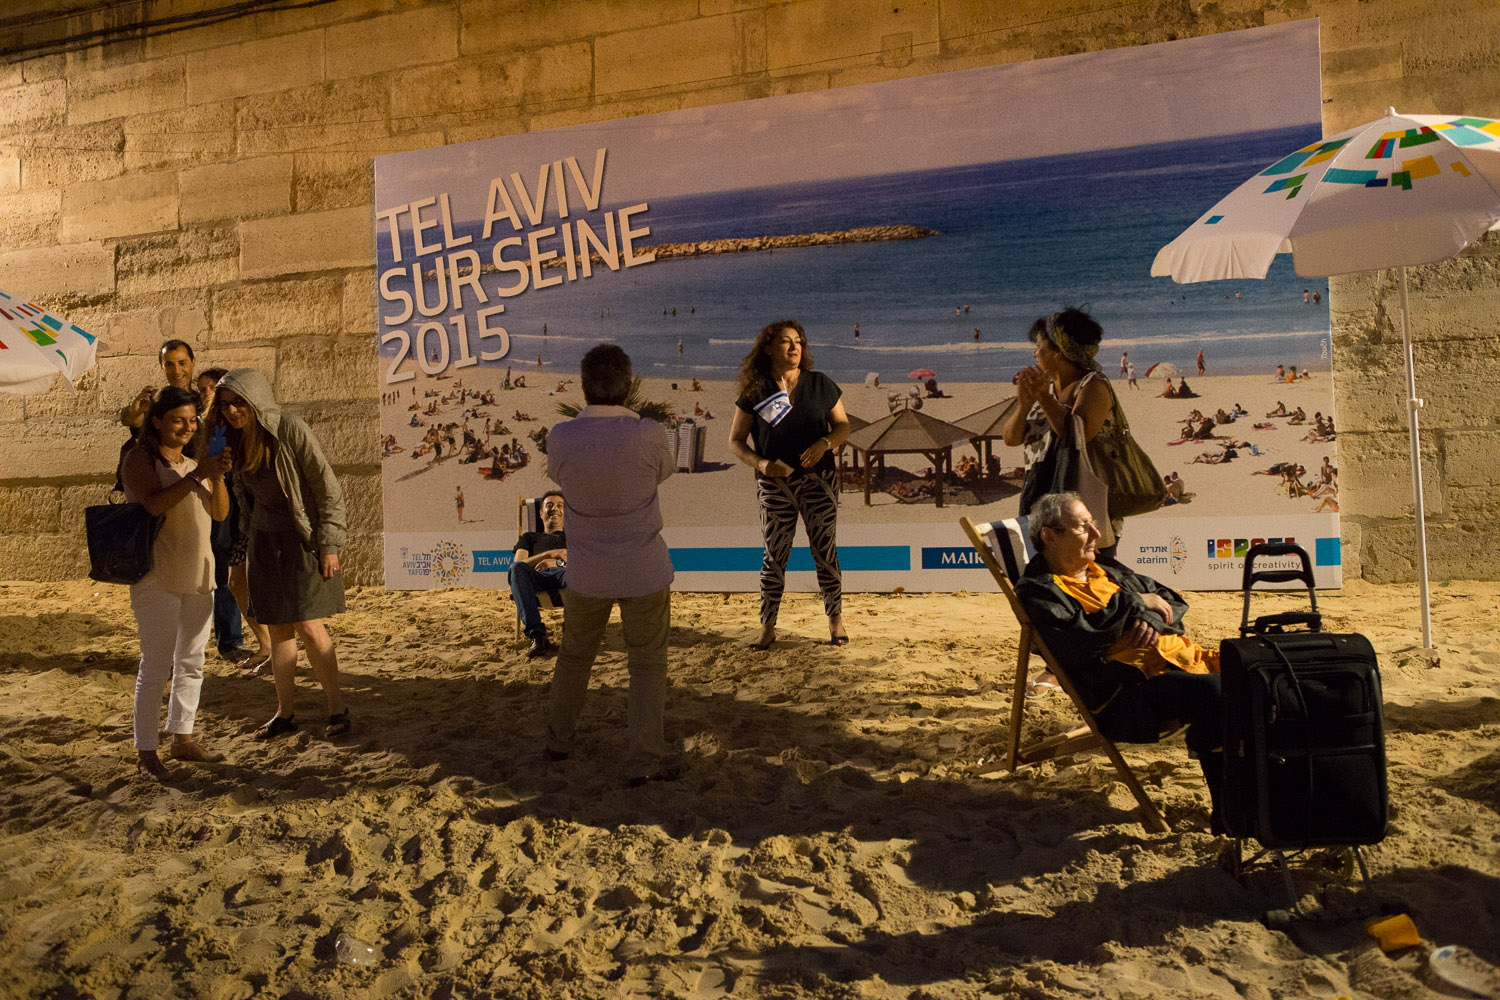  FRANCE, PARIS - AUGUST 13, 2015: „Tel Aviv sur Seine“, a onetime event in Paris celebrating the Israeli city with a makeshift beach, provoked a petition by a pro-Palestinian group addressing the mayor of Paris to revoke this event. Nearly 25.000 vot